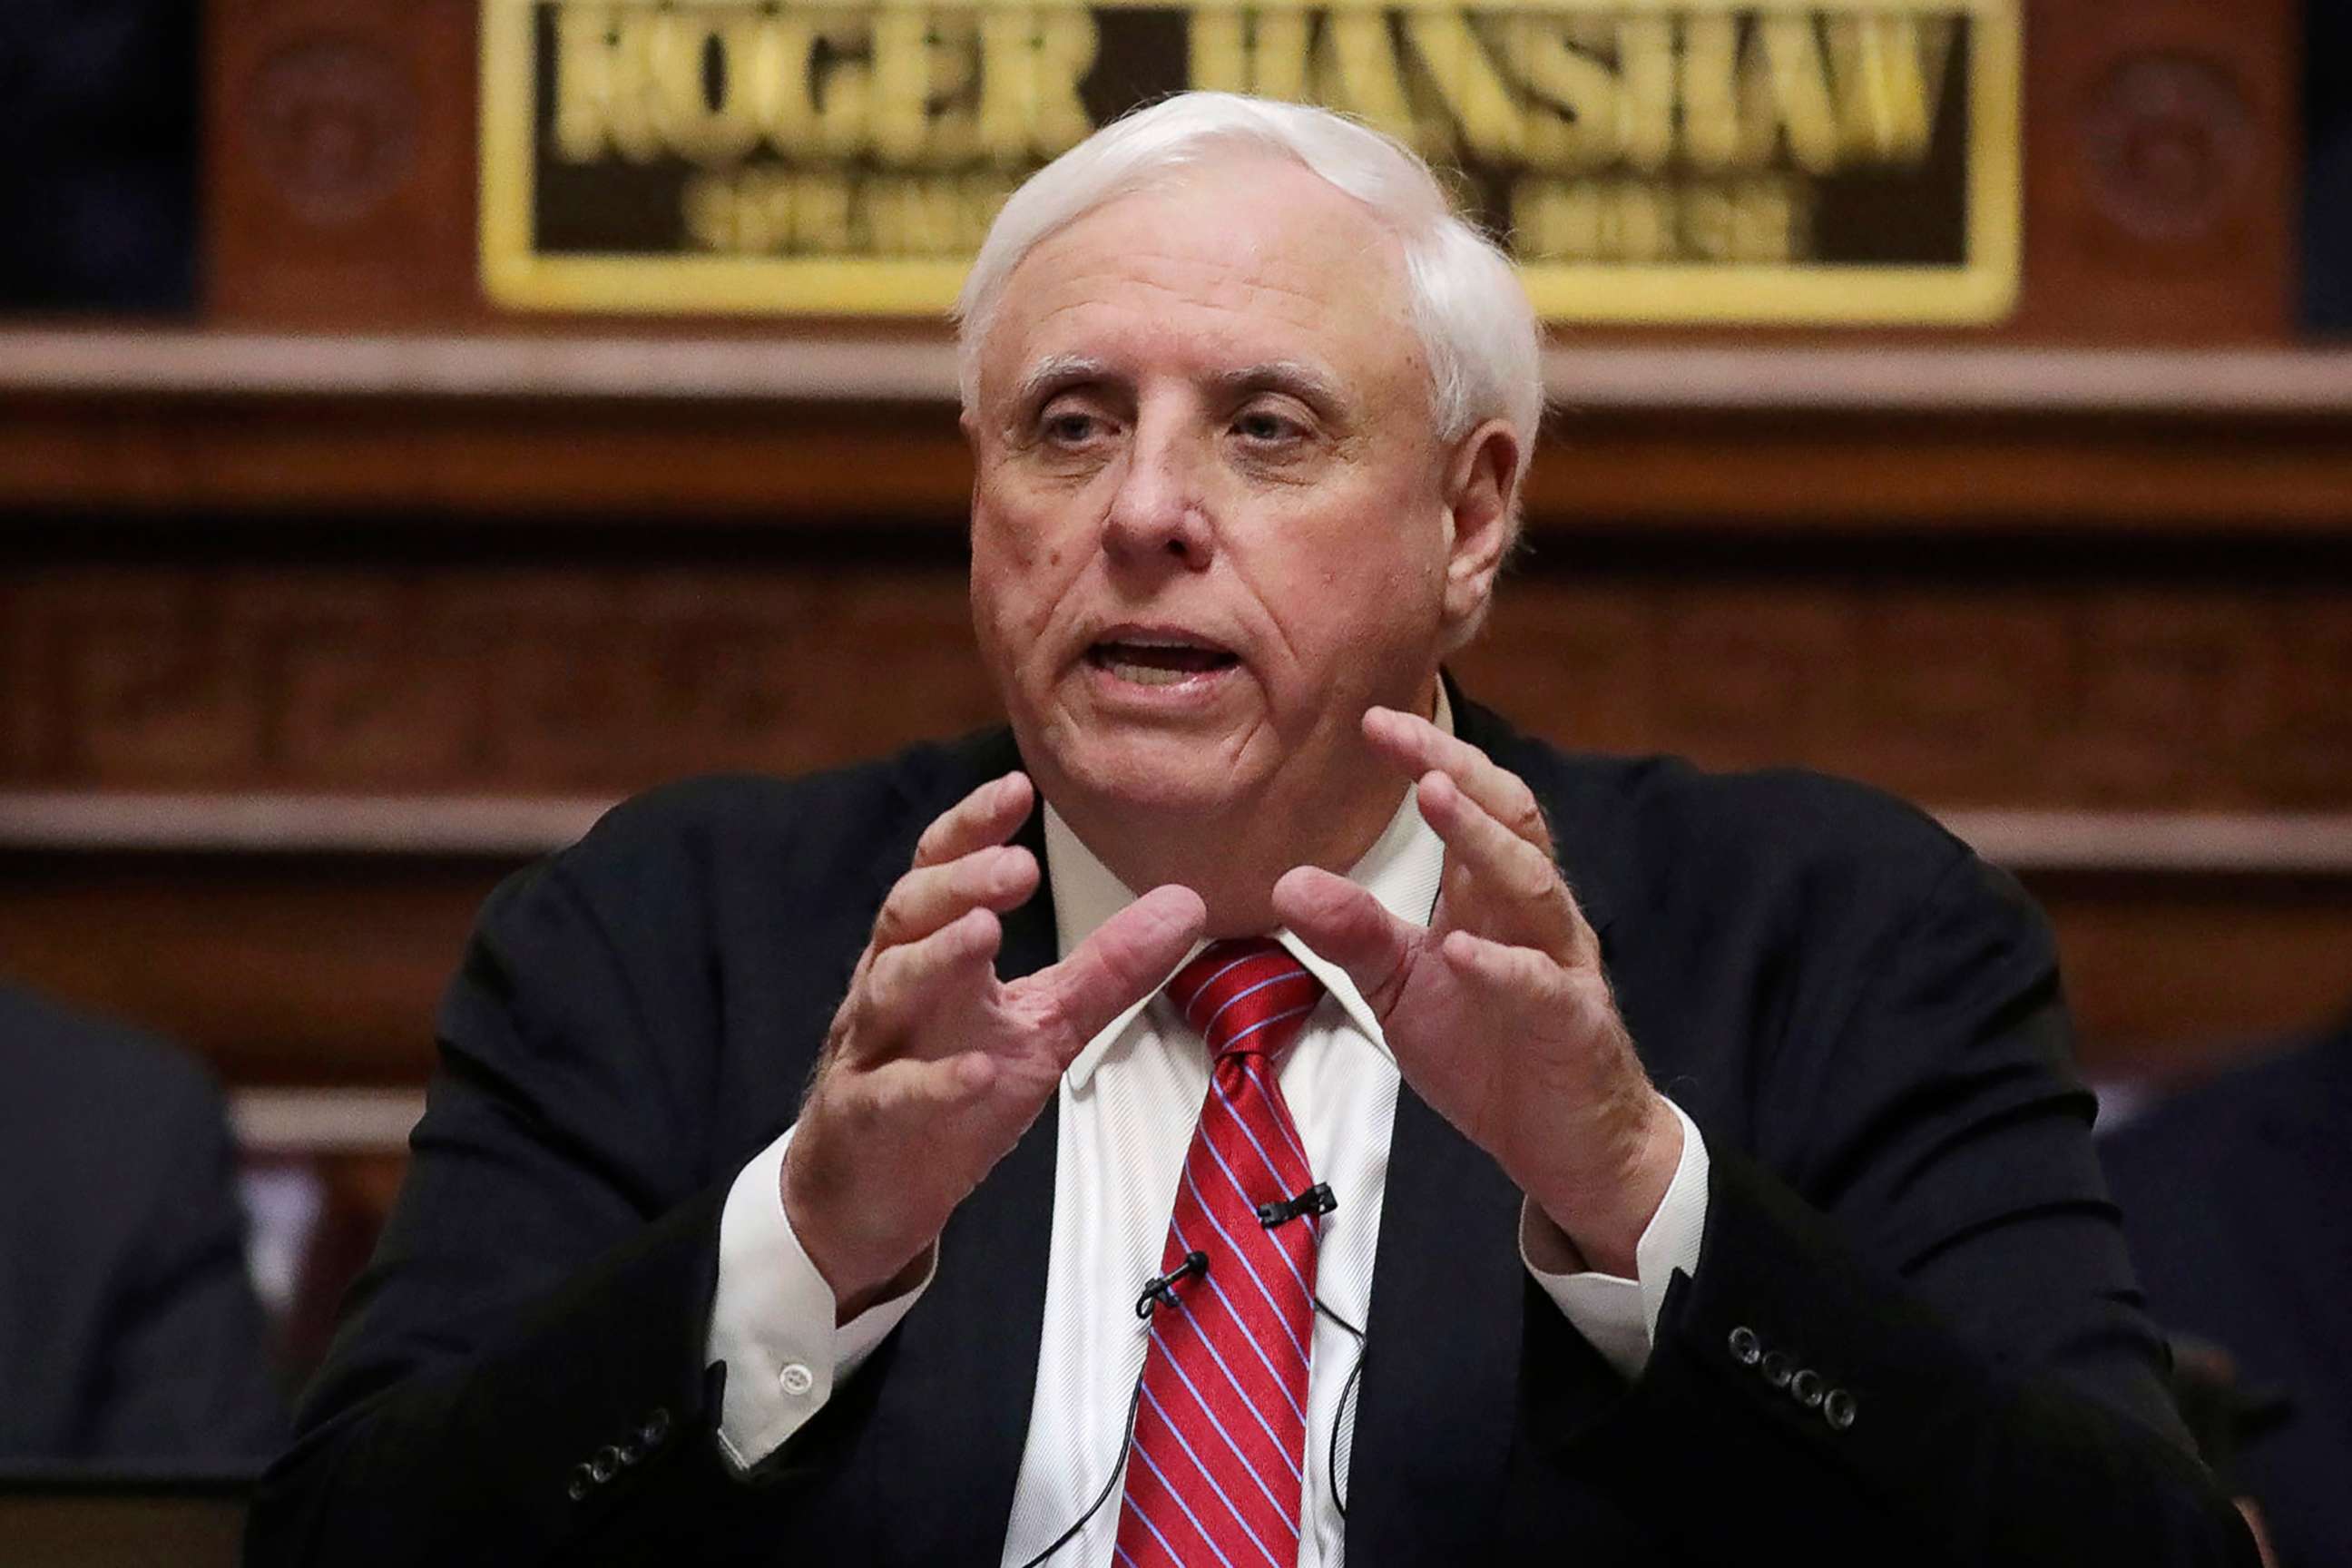 PHOTO: West Virginia Gov. Jim Justice delivers his annual State of the State address at the state capitol in Charleston, W.Va., Jan. 8, 2020.